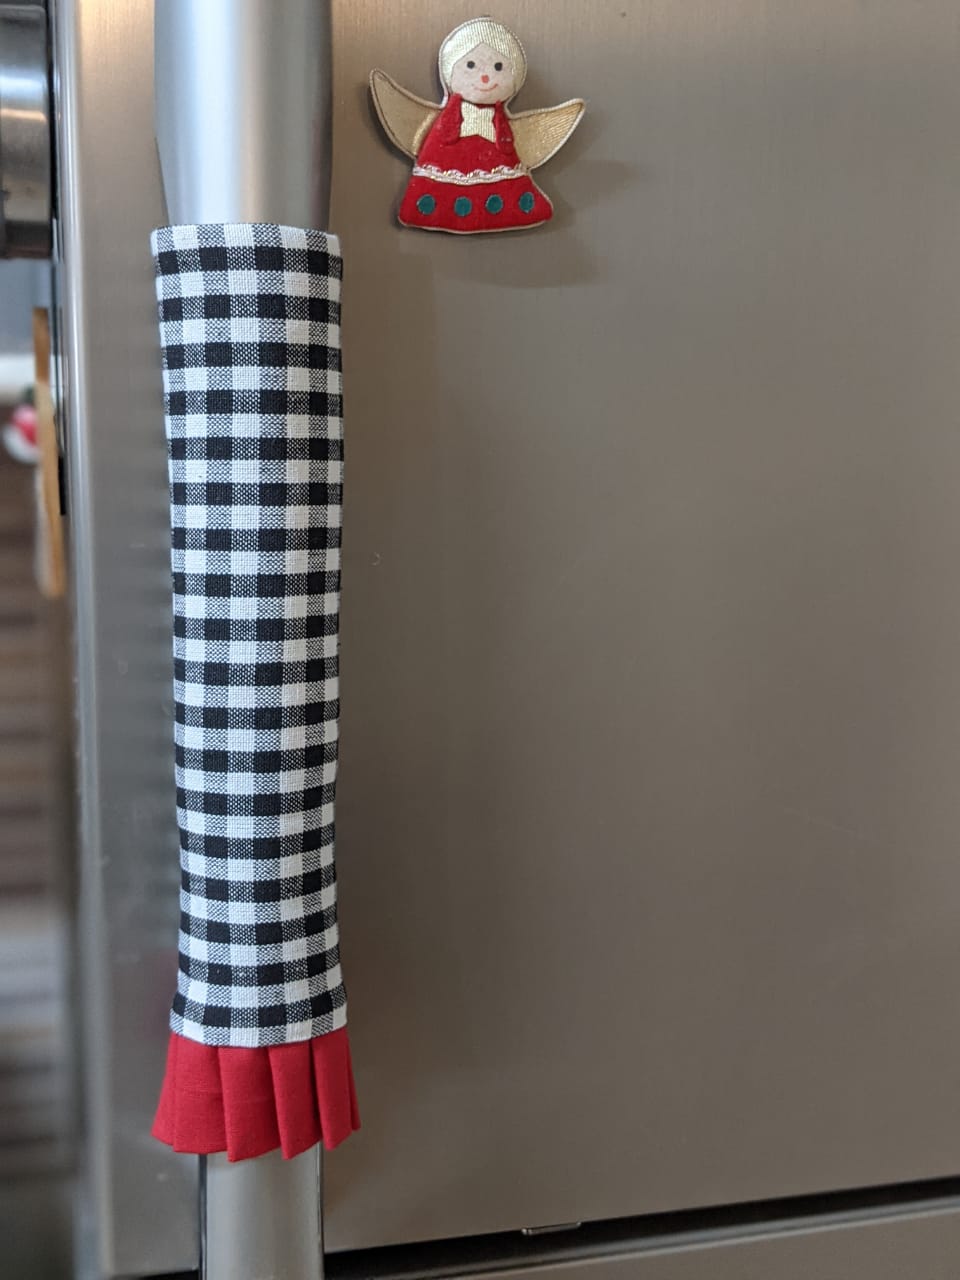 Fridge Handle Covers - Black and white gingham with red frills (set of 2)